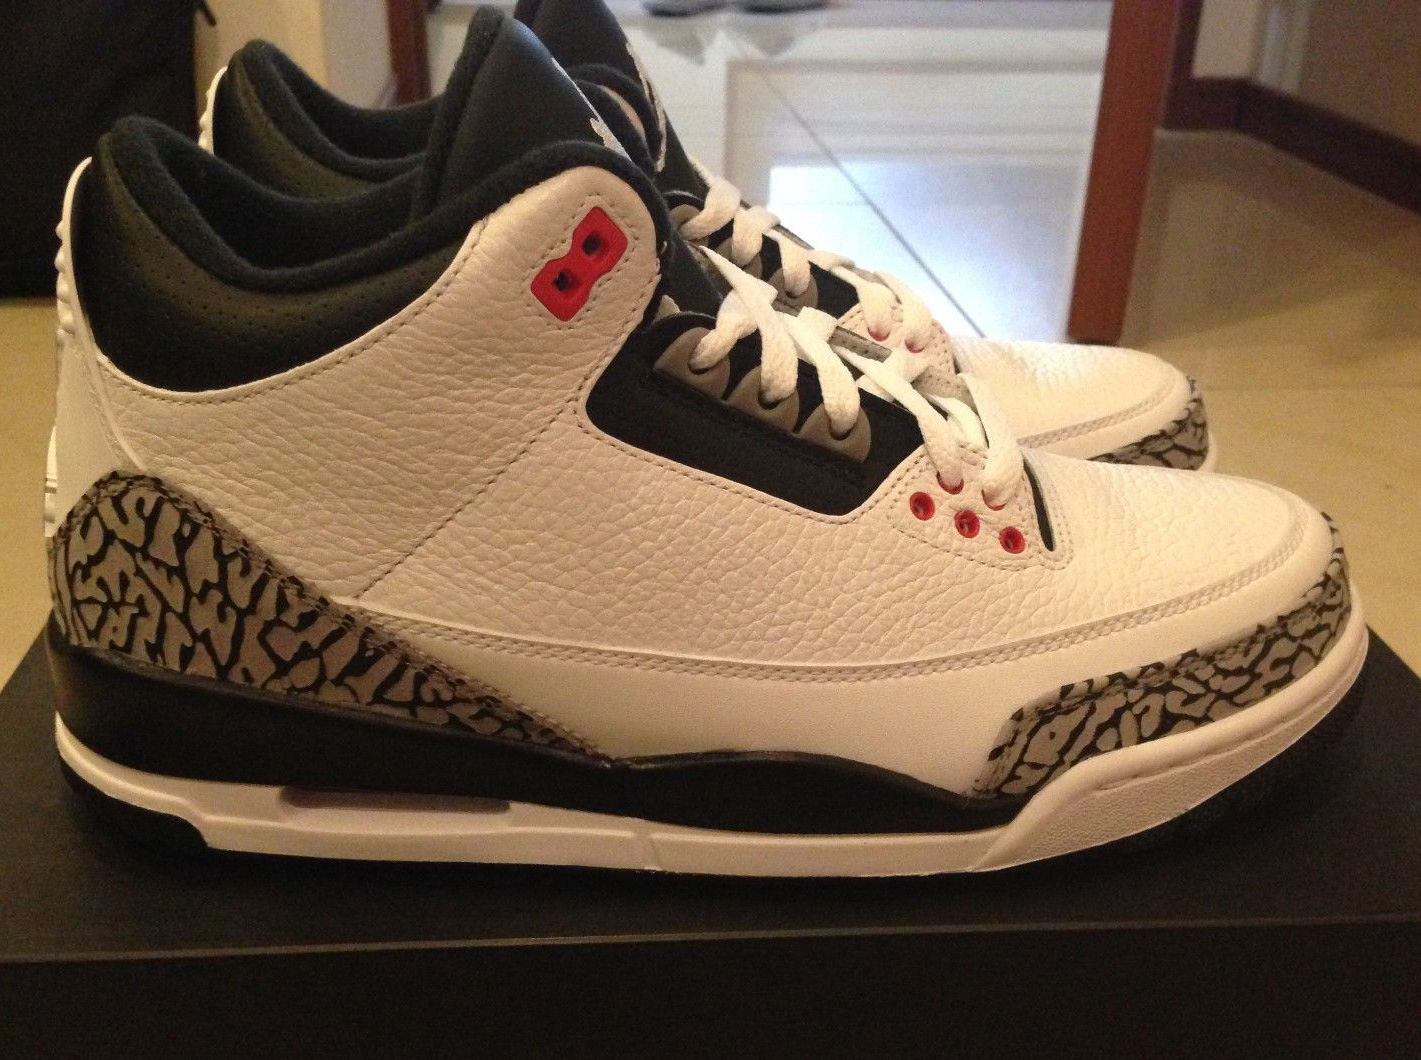 Air Jordan 3 Retro "Infrared 23" - Available Early on eBay